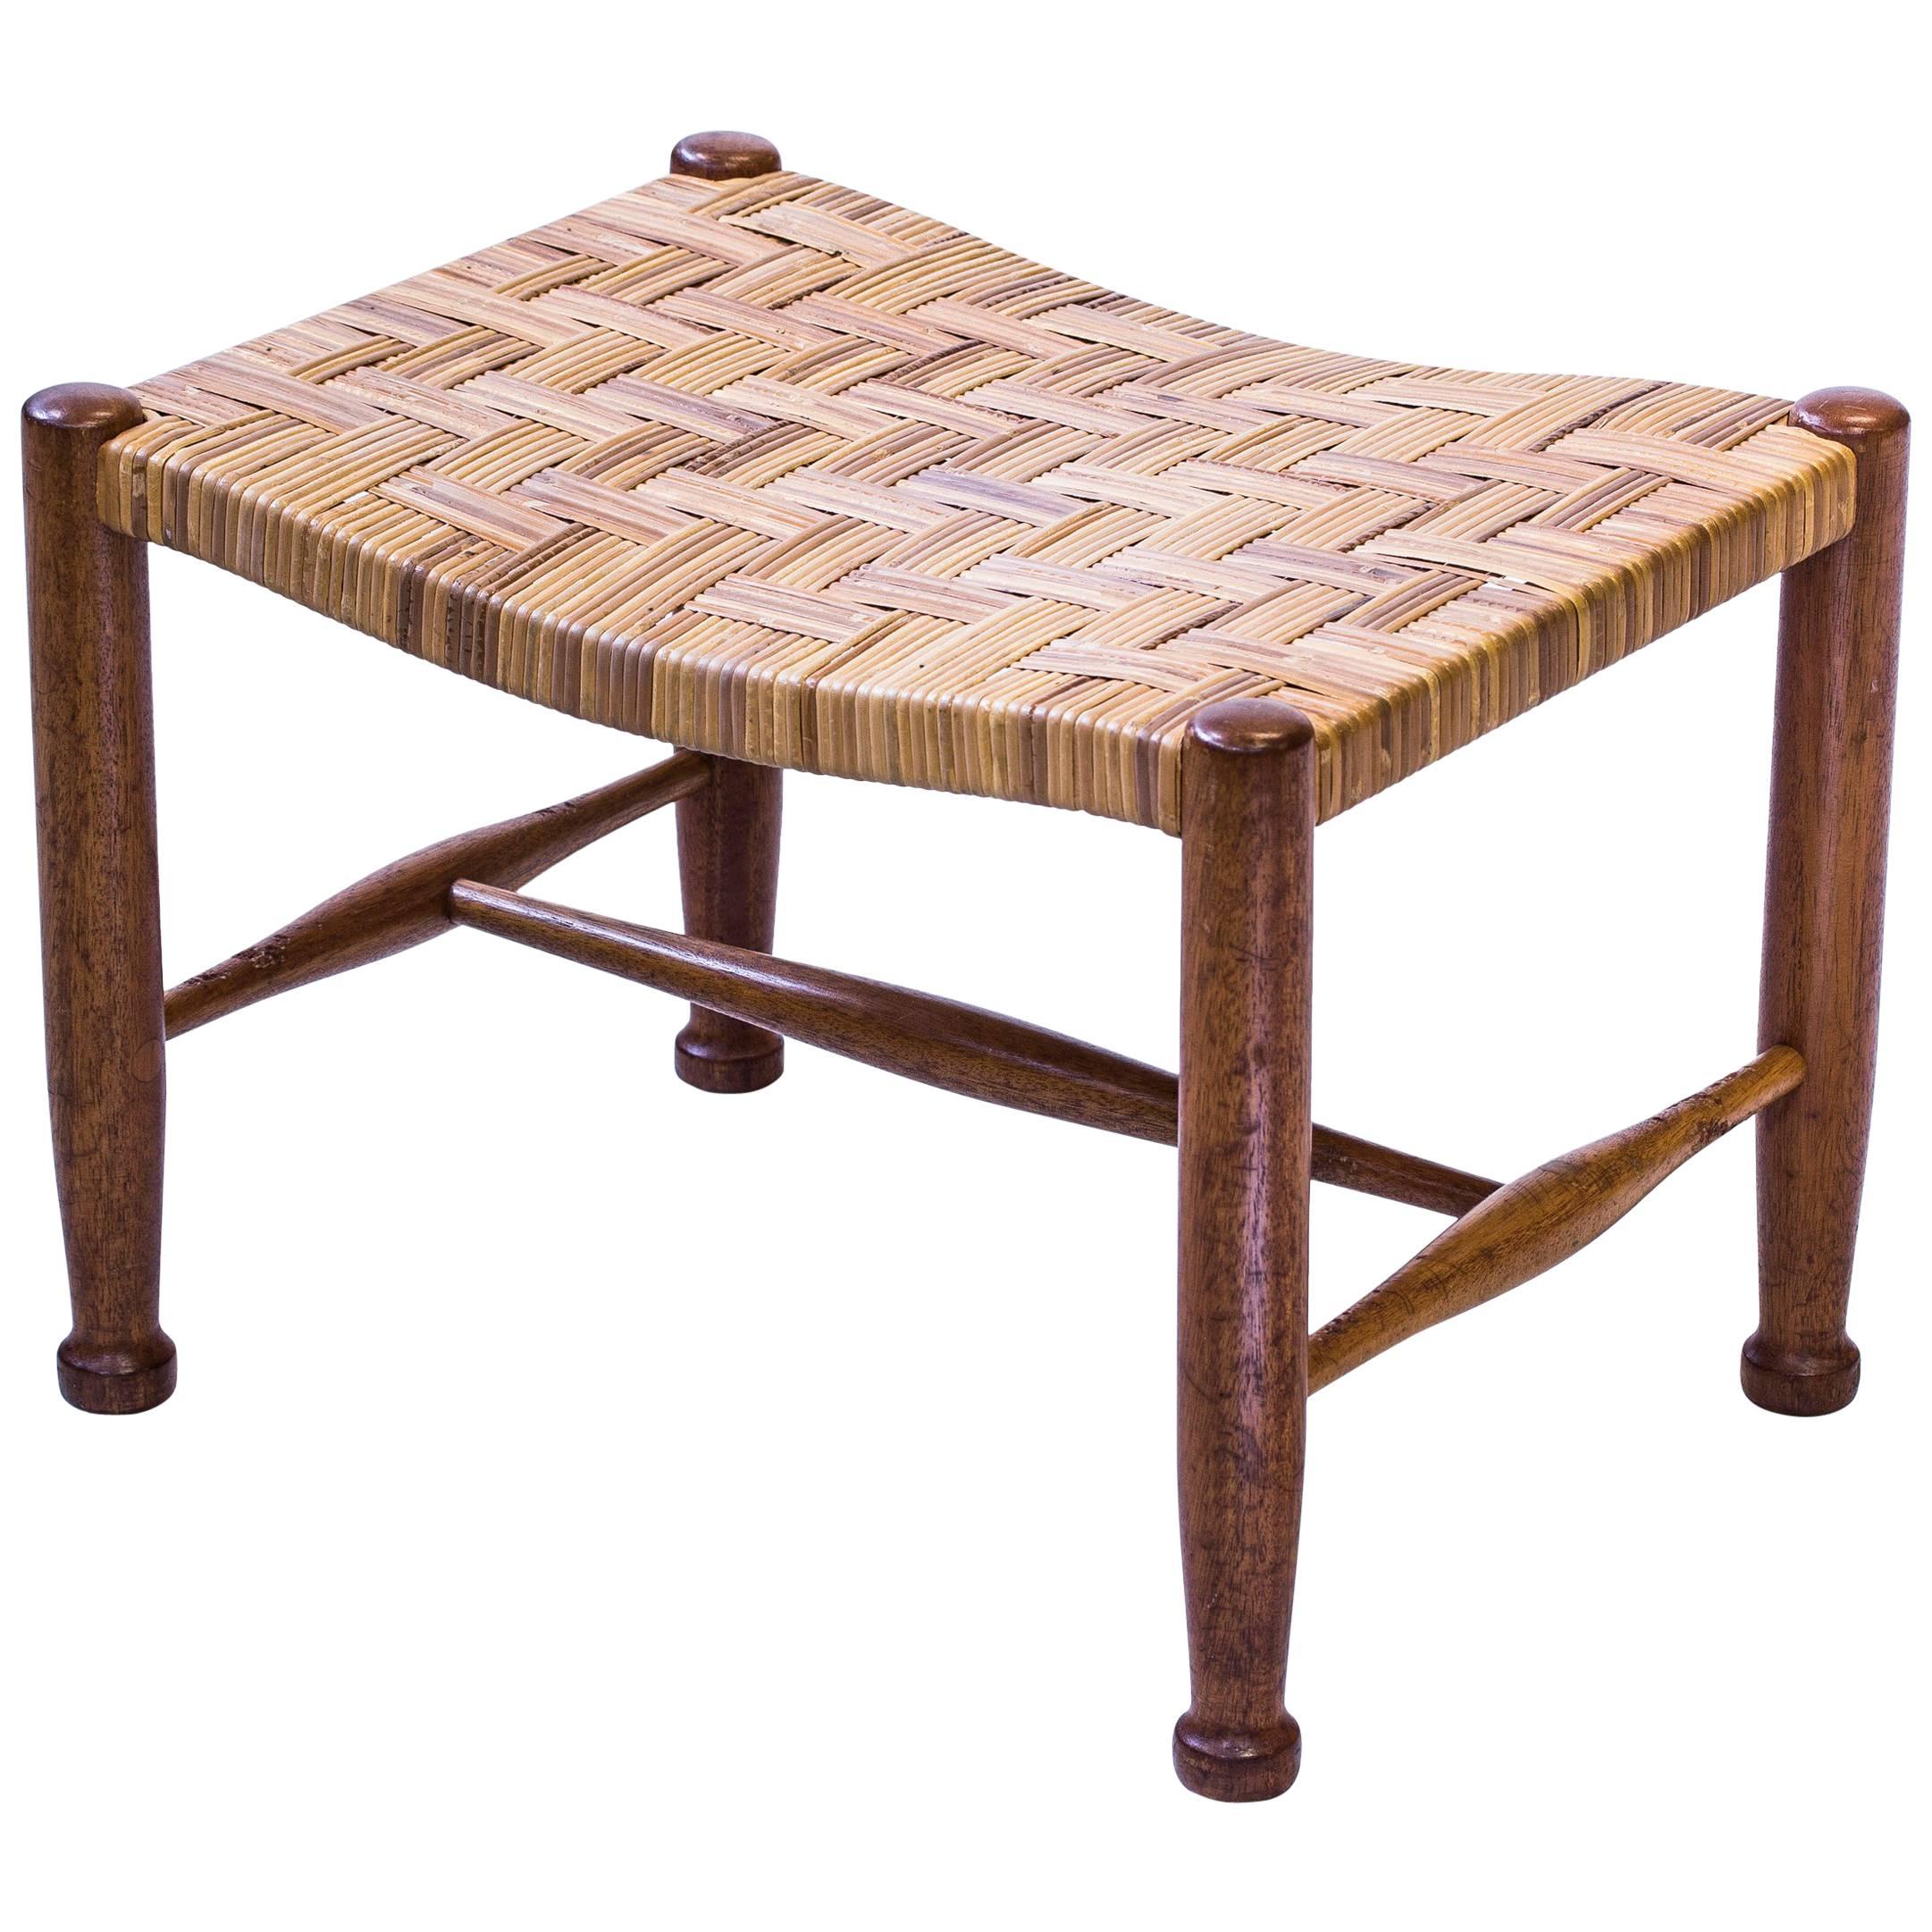 Mahogany Stool with Rattan Seat by Josef Frank, Sweden, 1950s